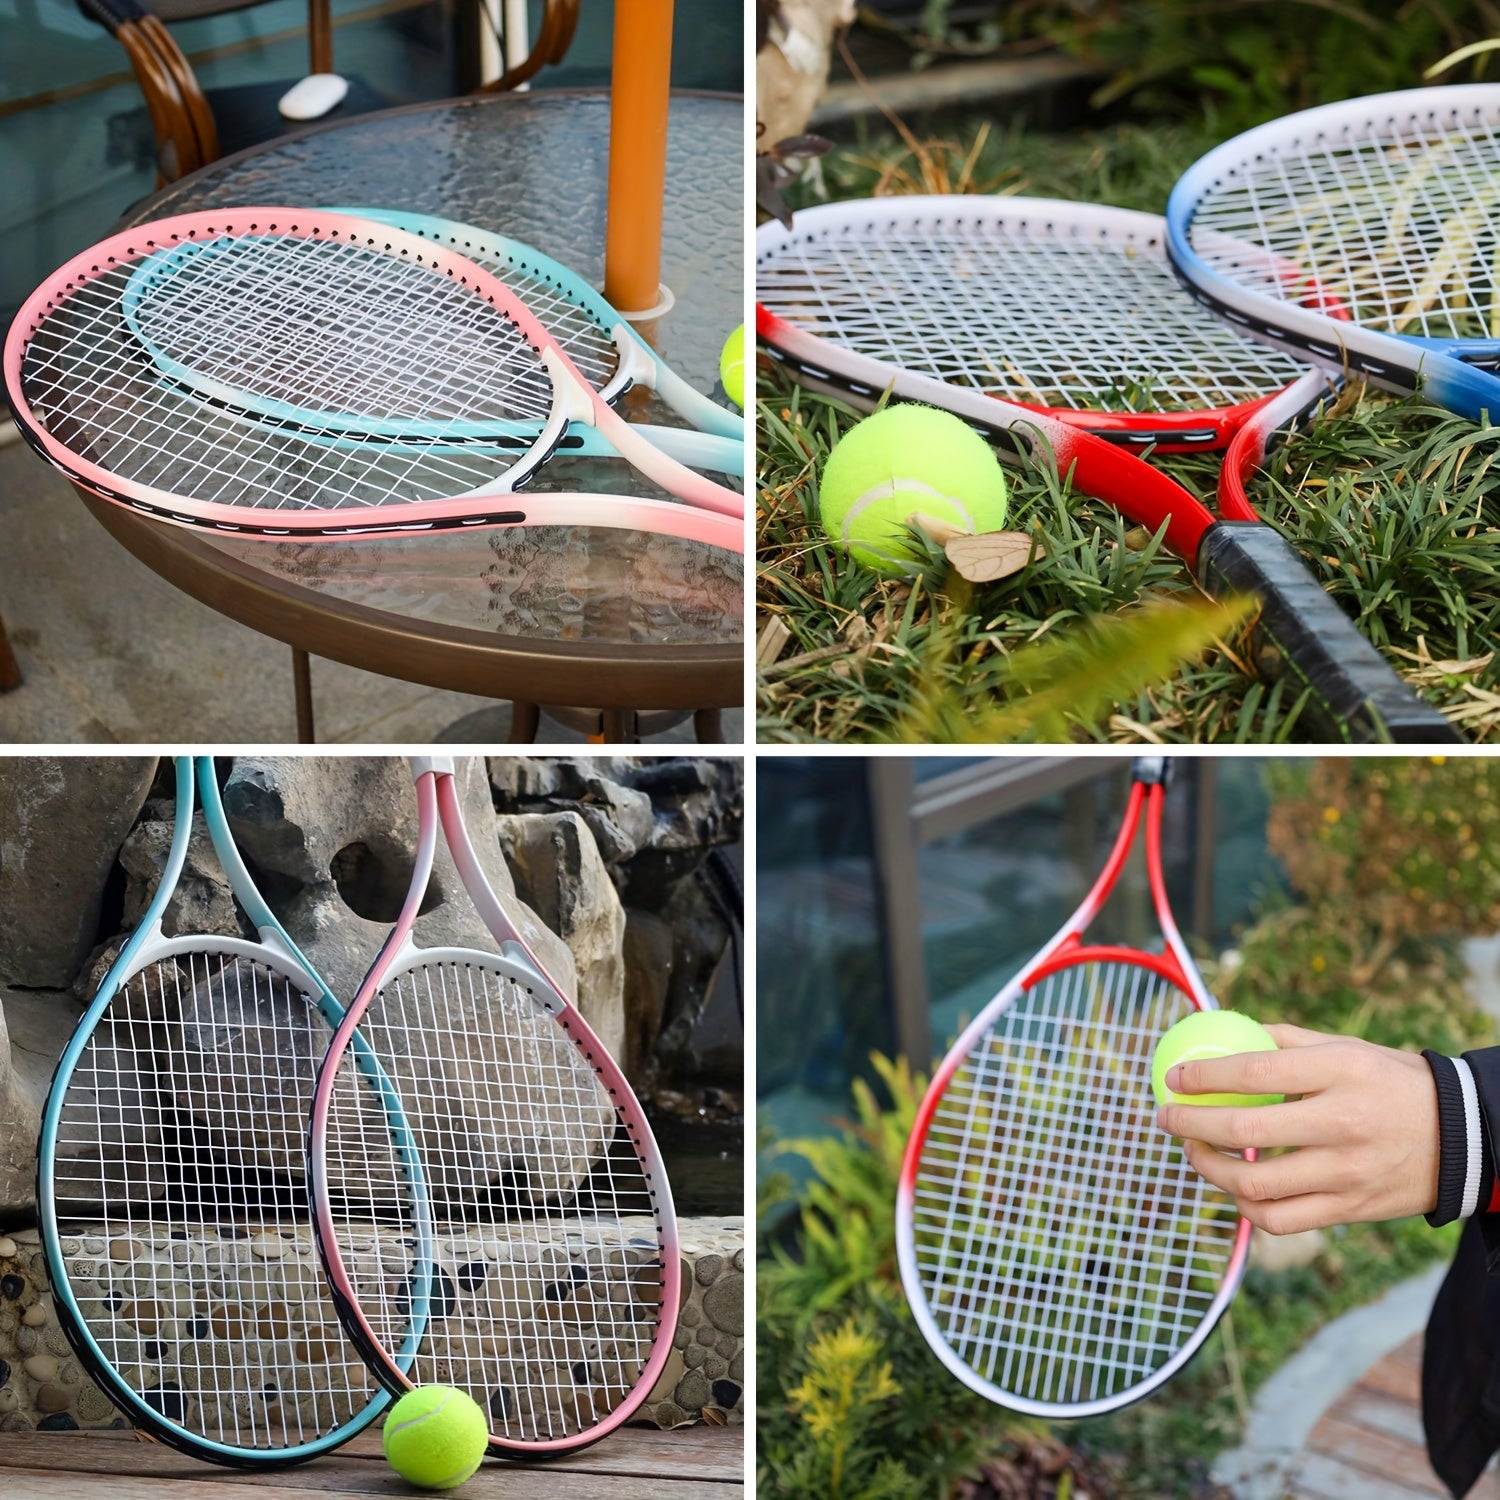 1pc, Professional Tennis Racket With Aluminum Frame, Shiny 3D Surface Tennis Racket With Non-slip Handle Grip And Storage Bag